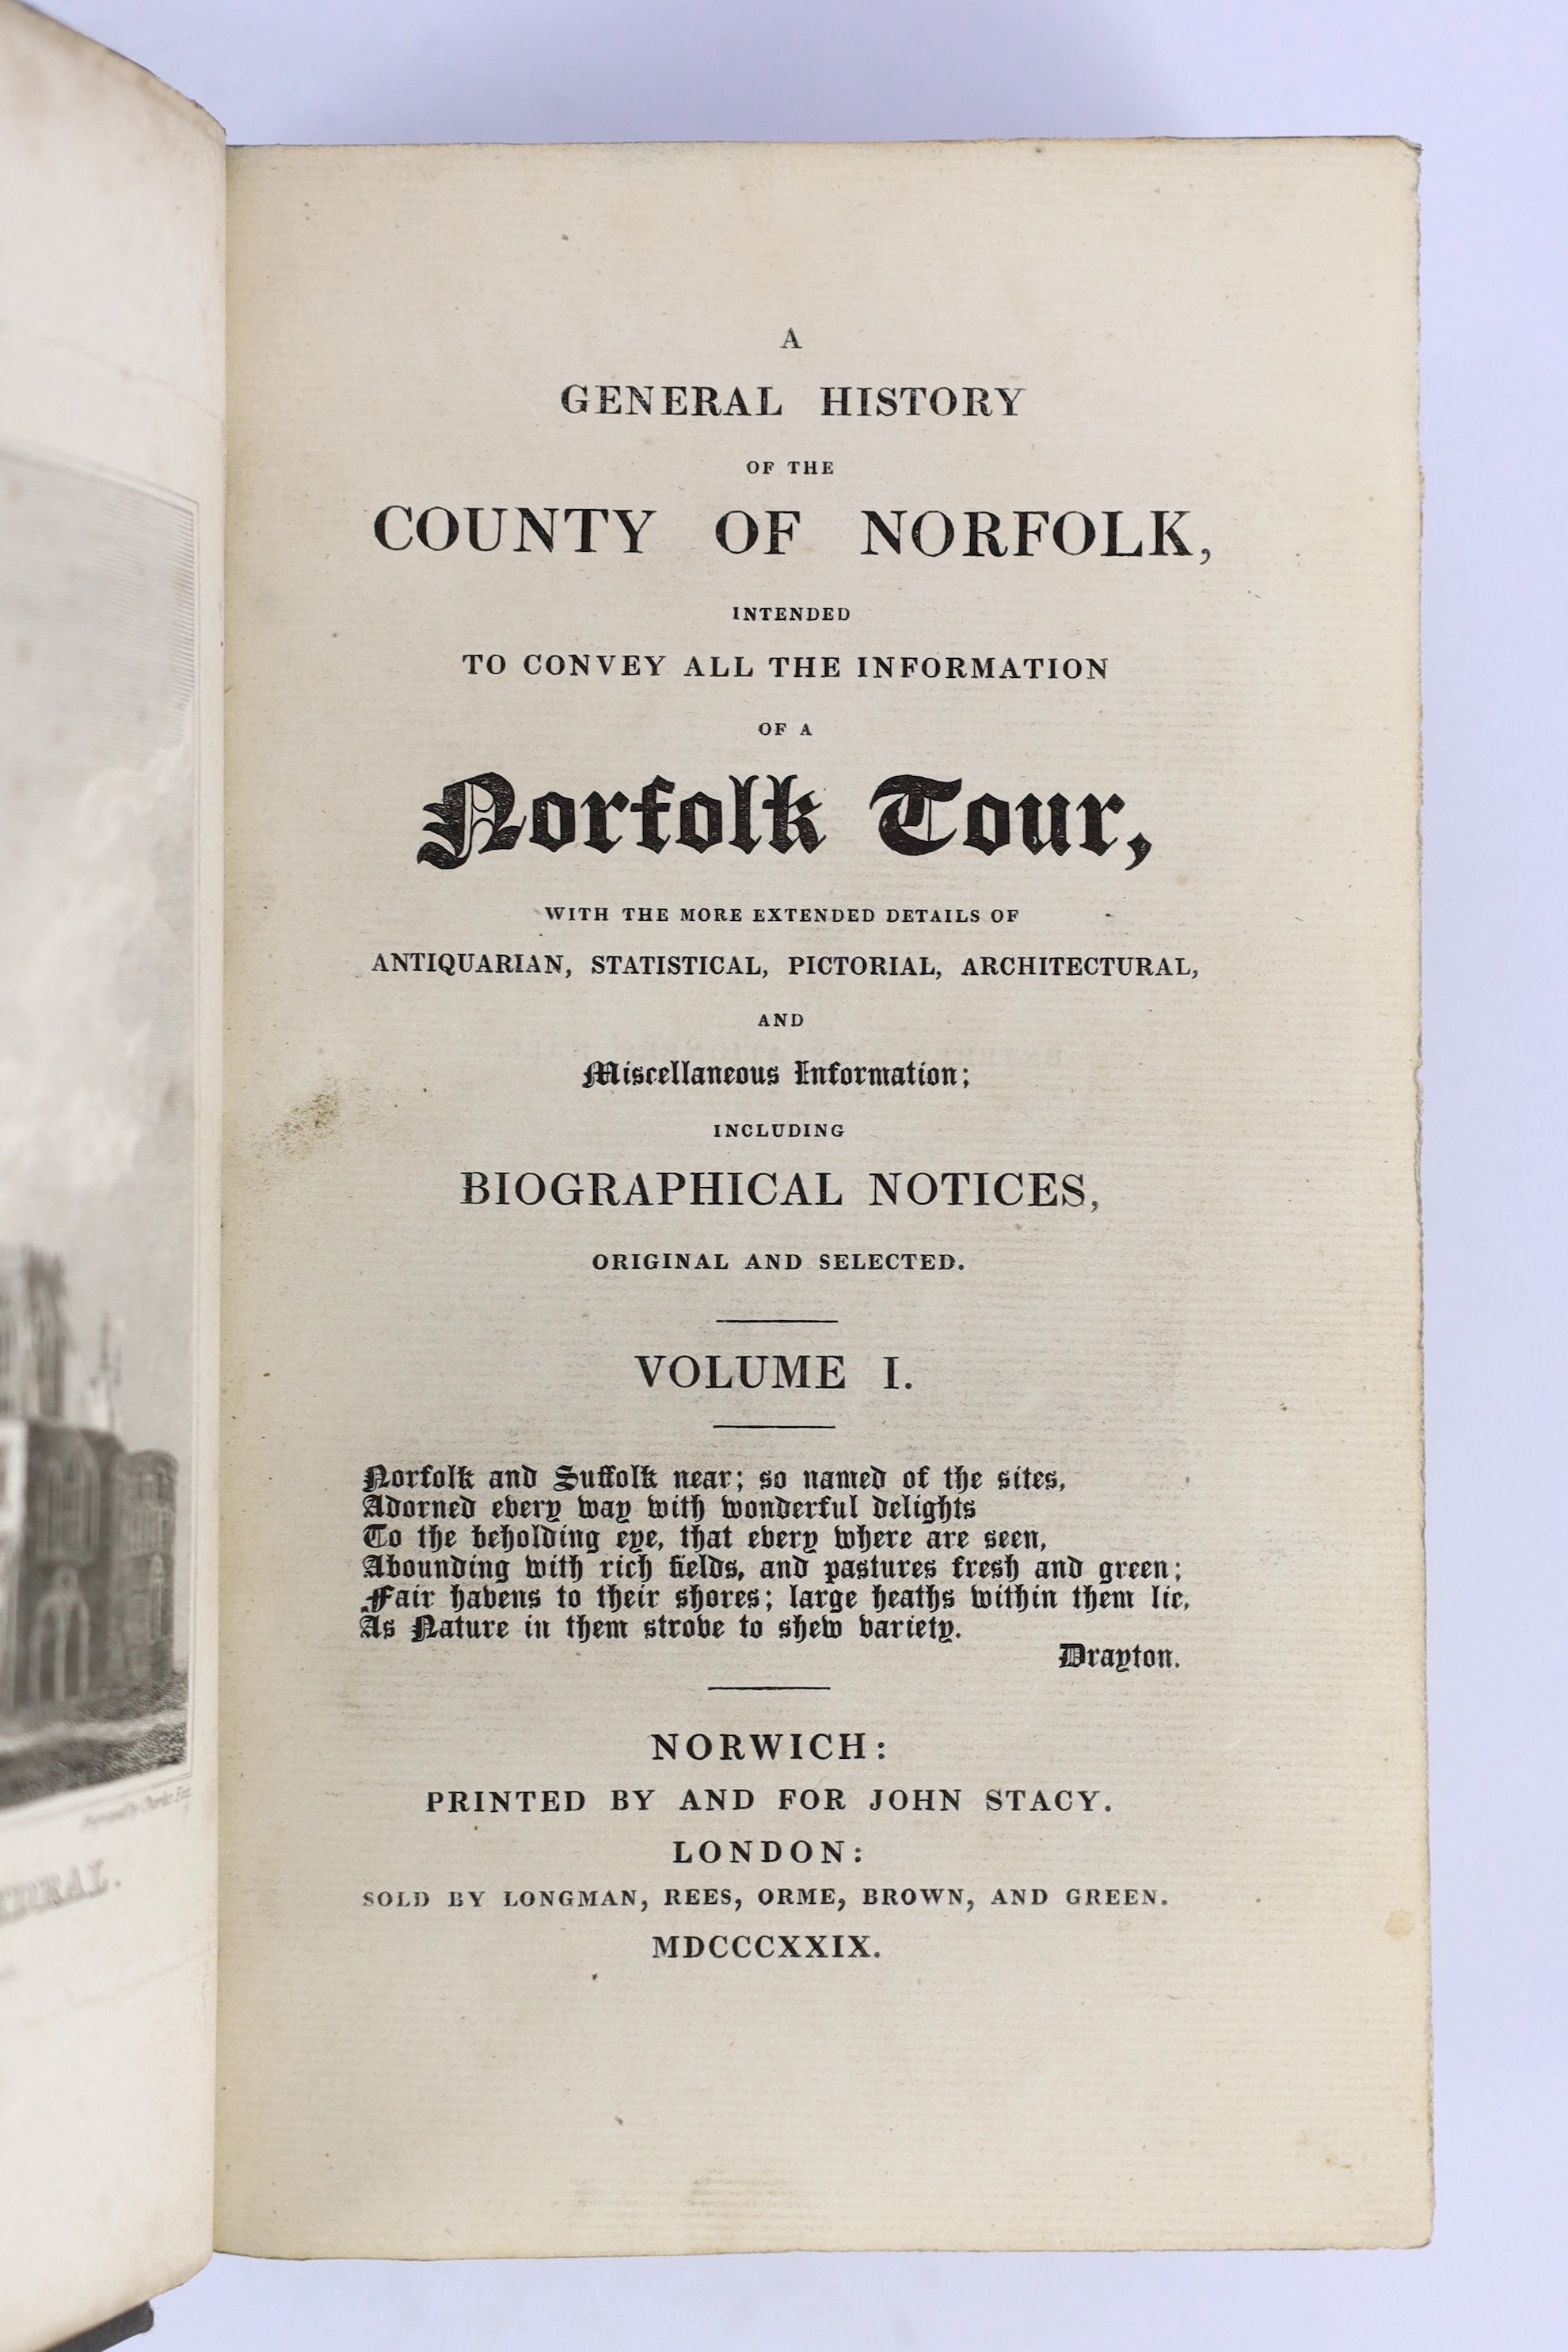 NORFOLK: A General History of the County of Norfolk, intended to convey all the information of a Norfolk Tour ... 2 vols, frontis and hand-coloured folded map, subscribers list